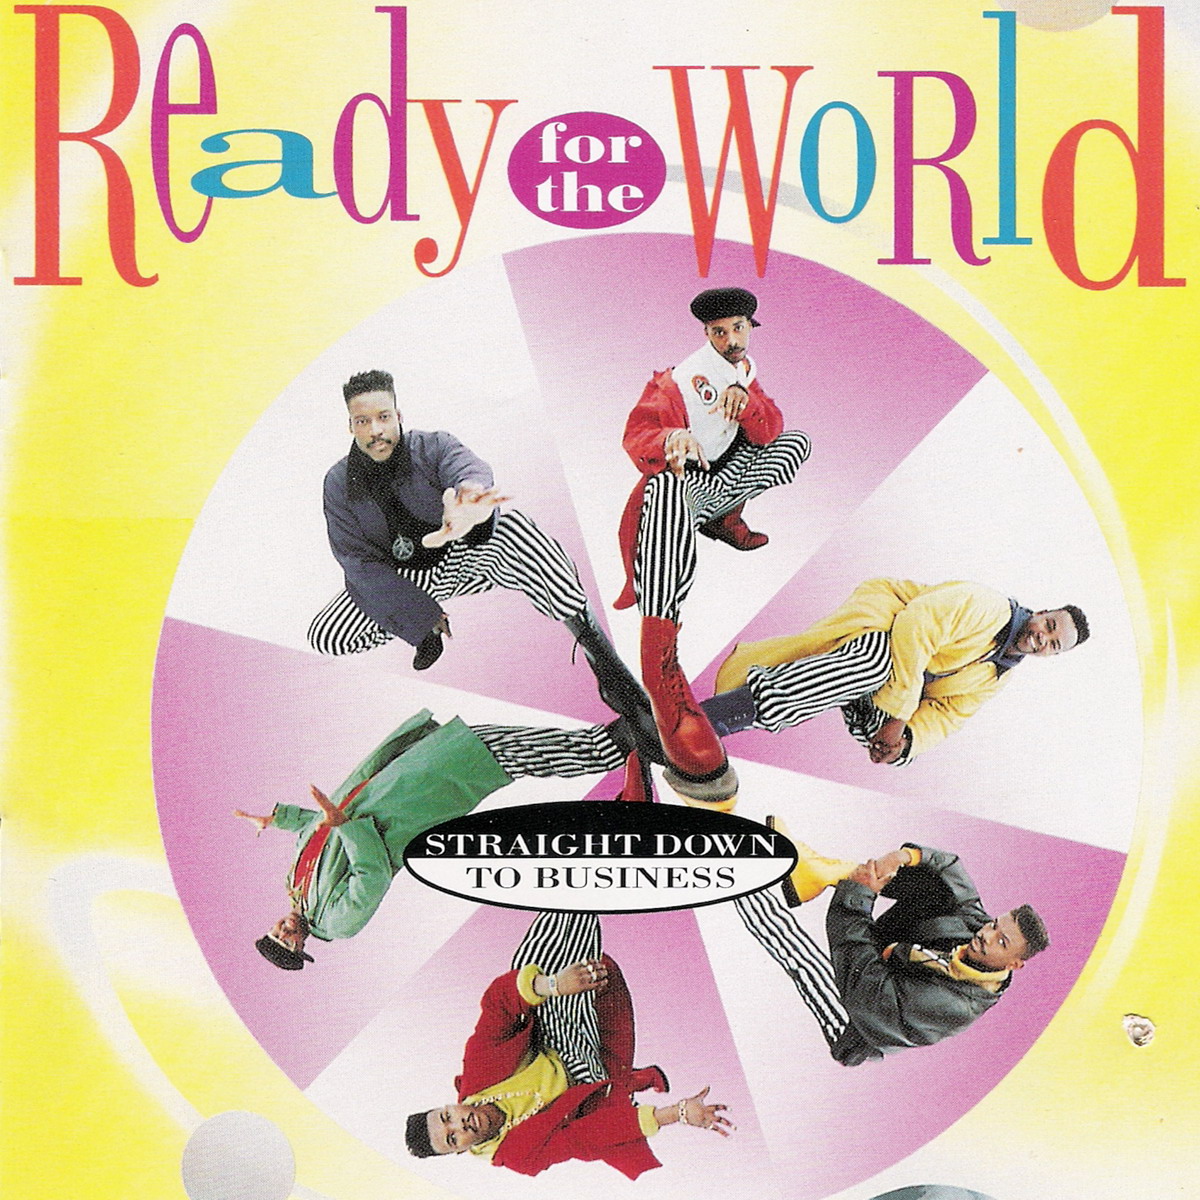 Straight down. Ready for the World ready for the World. One World album 1990s.